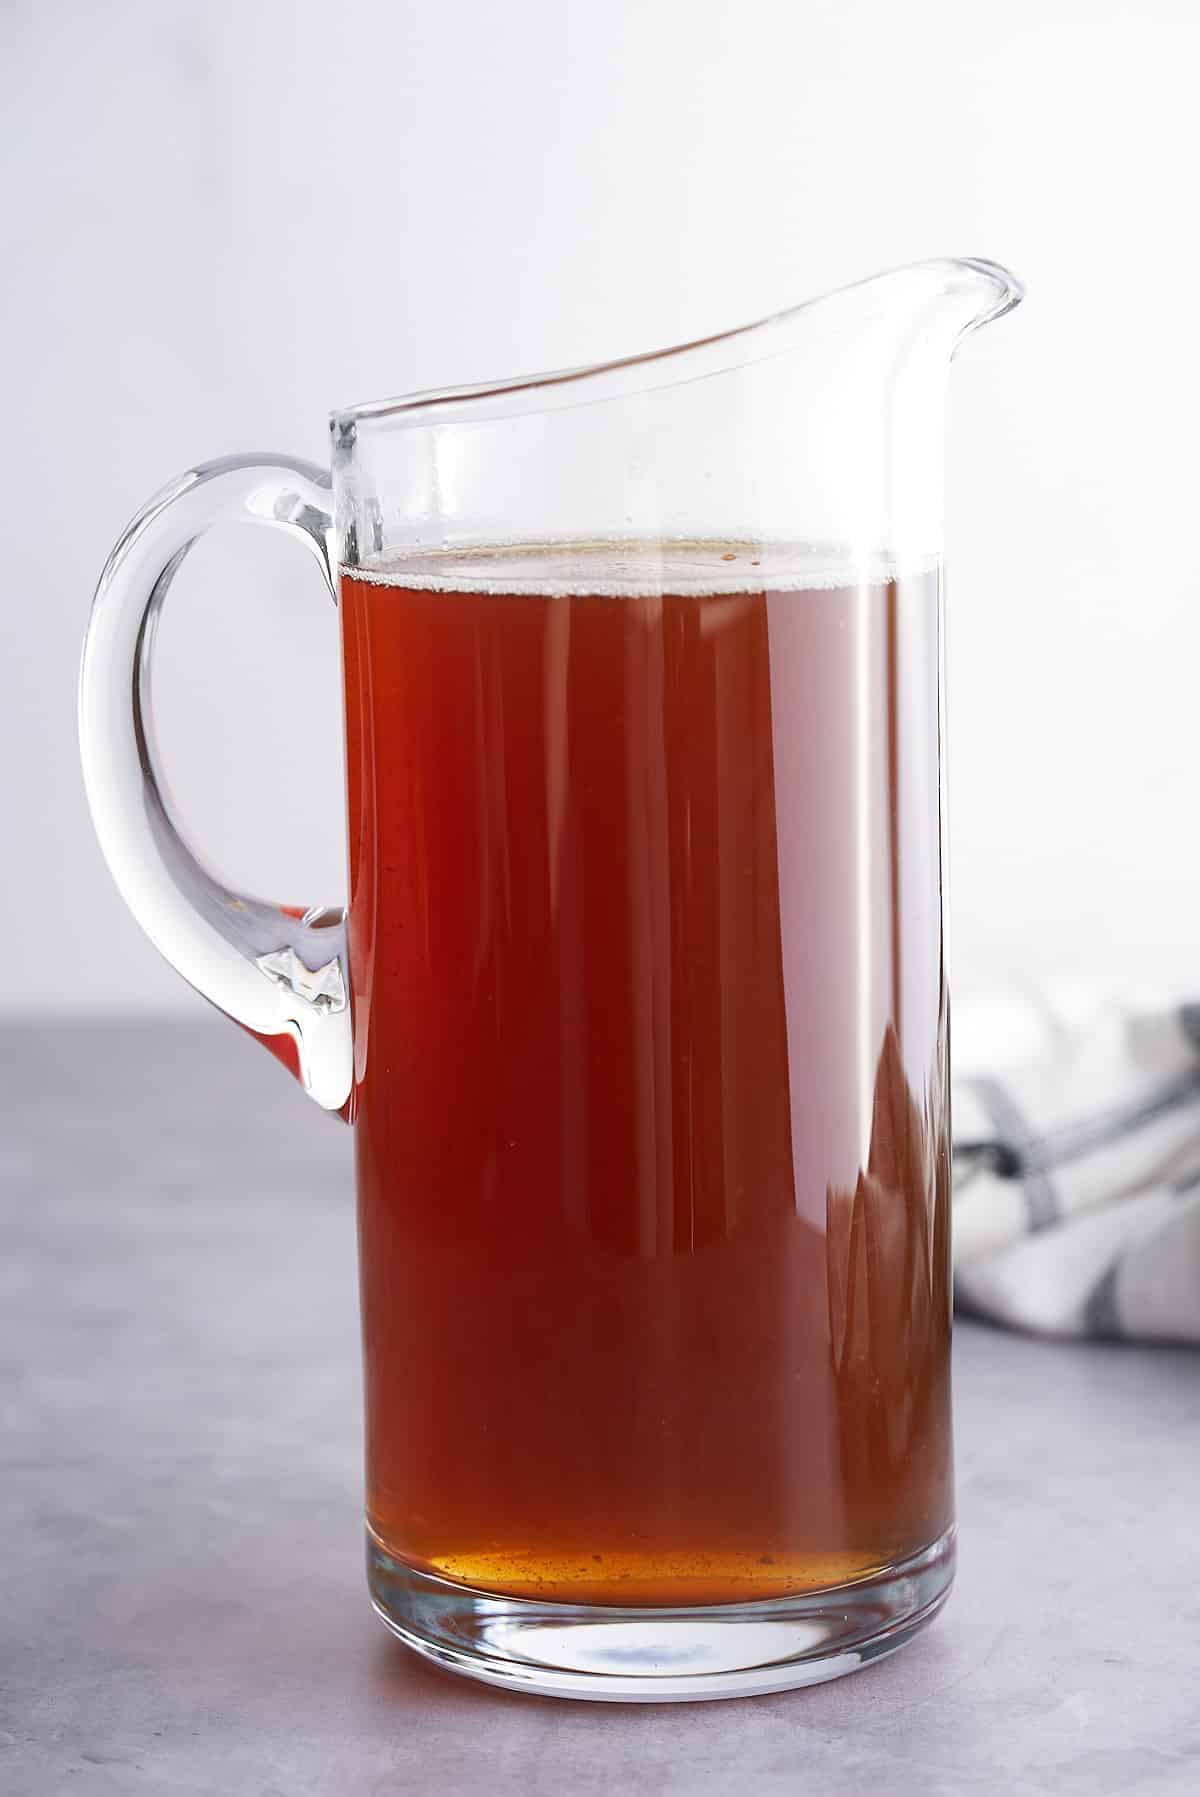 A large glass pitcher filled with tamarind juice.